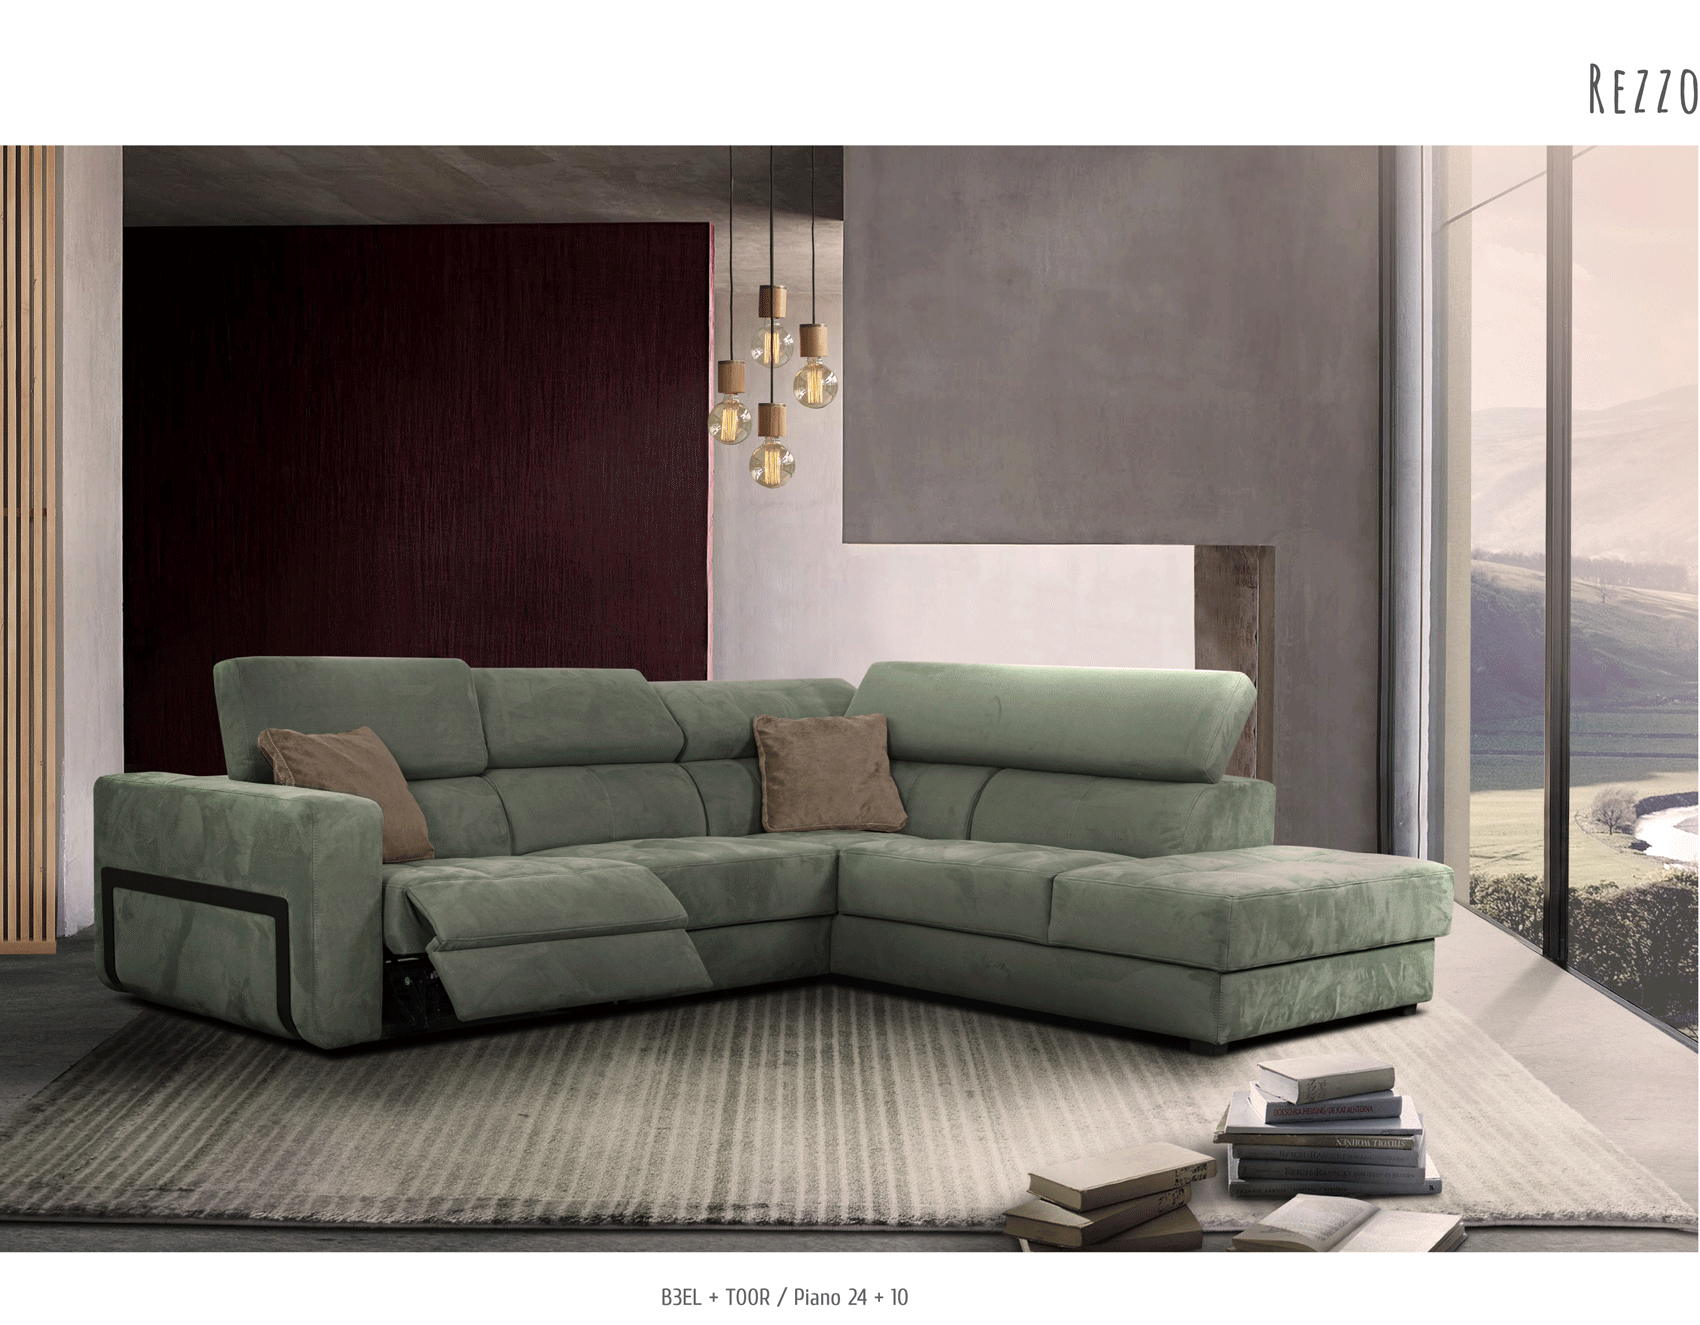 Brands European Living Collection Rezzo Sectional w/Recliner